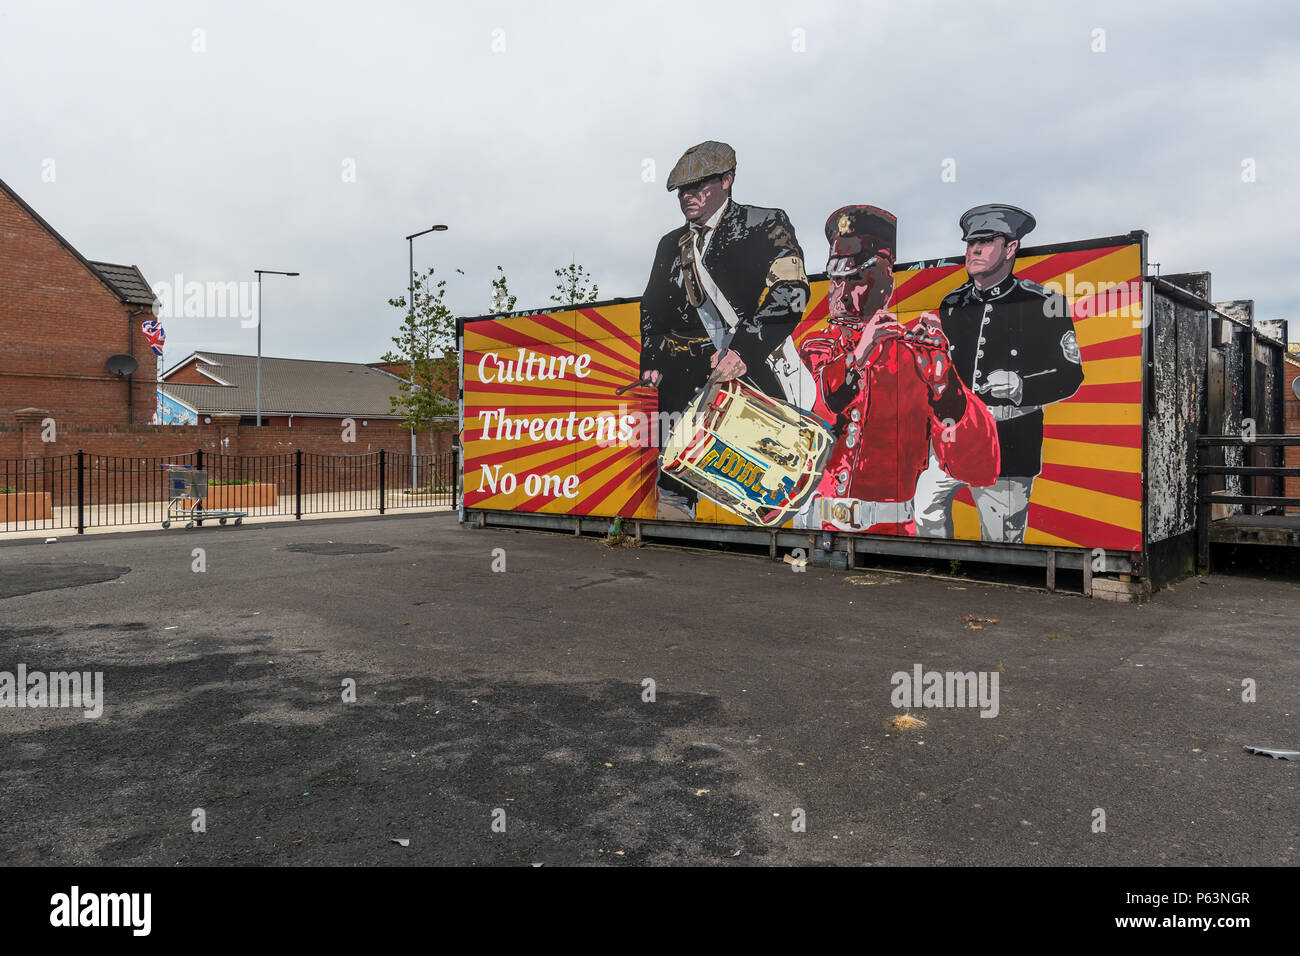 Culture Threatens No One mural in East Belfast Stock Photo